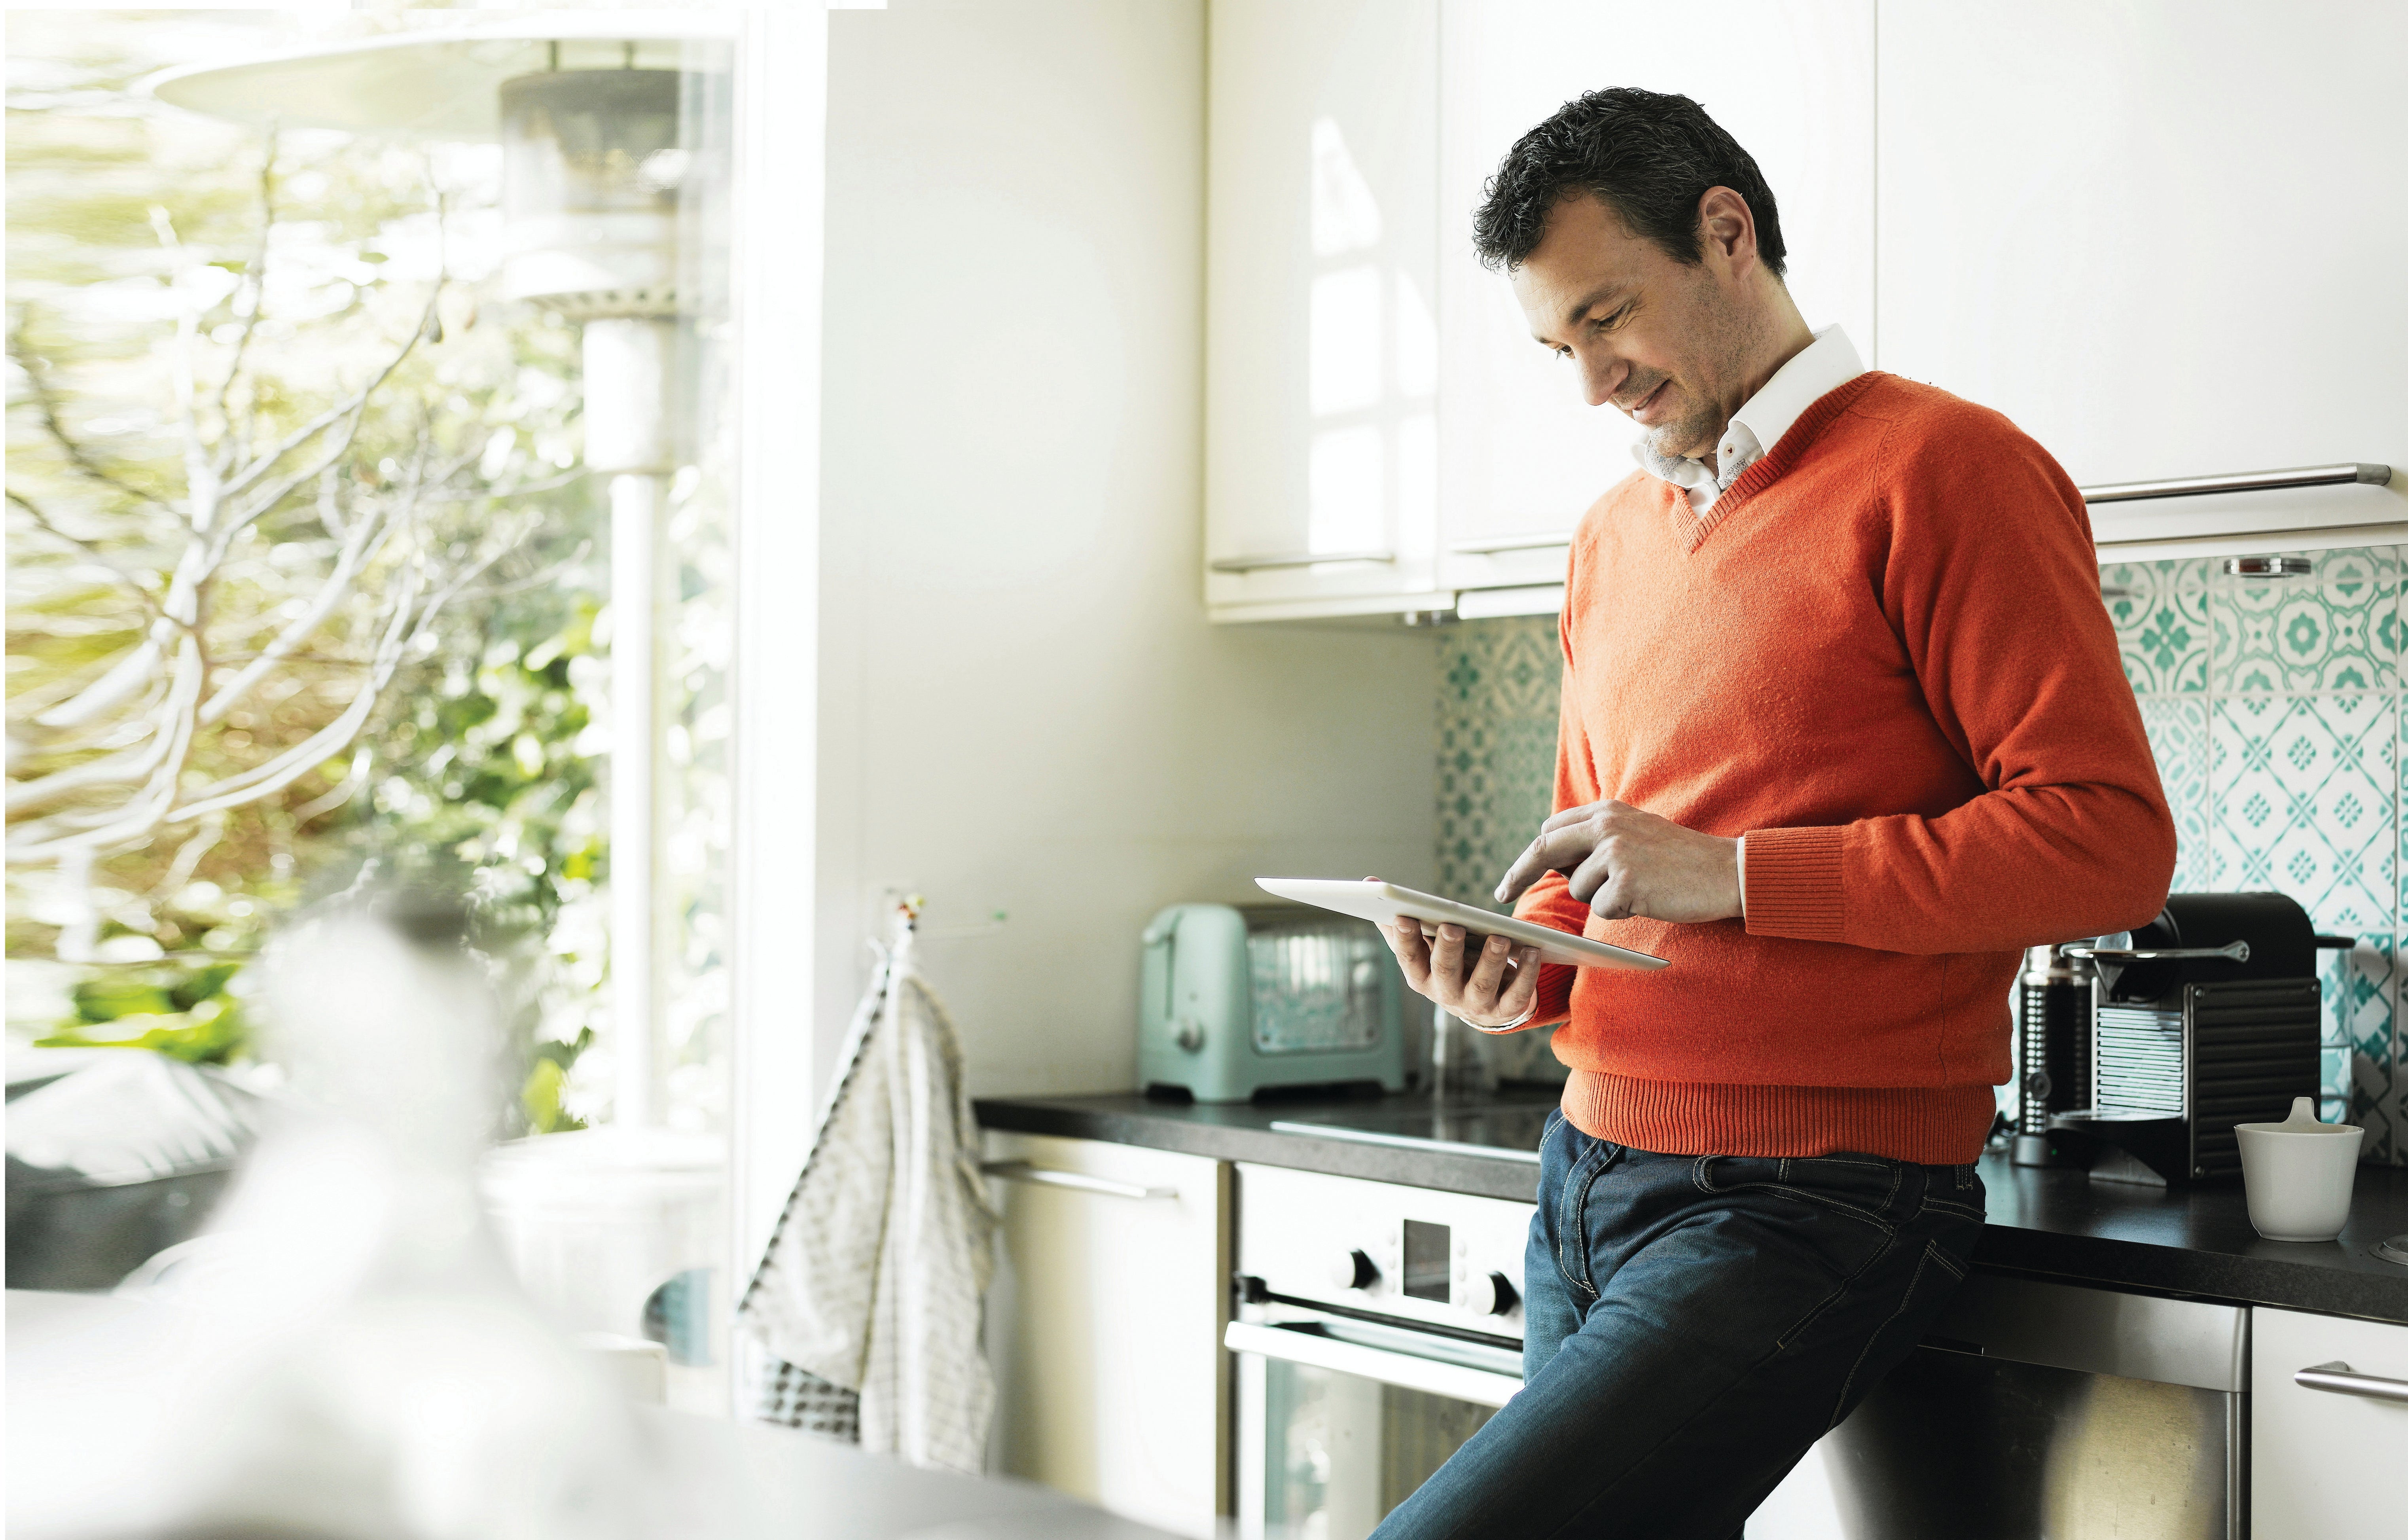 Mature man using tablet in kitchen